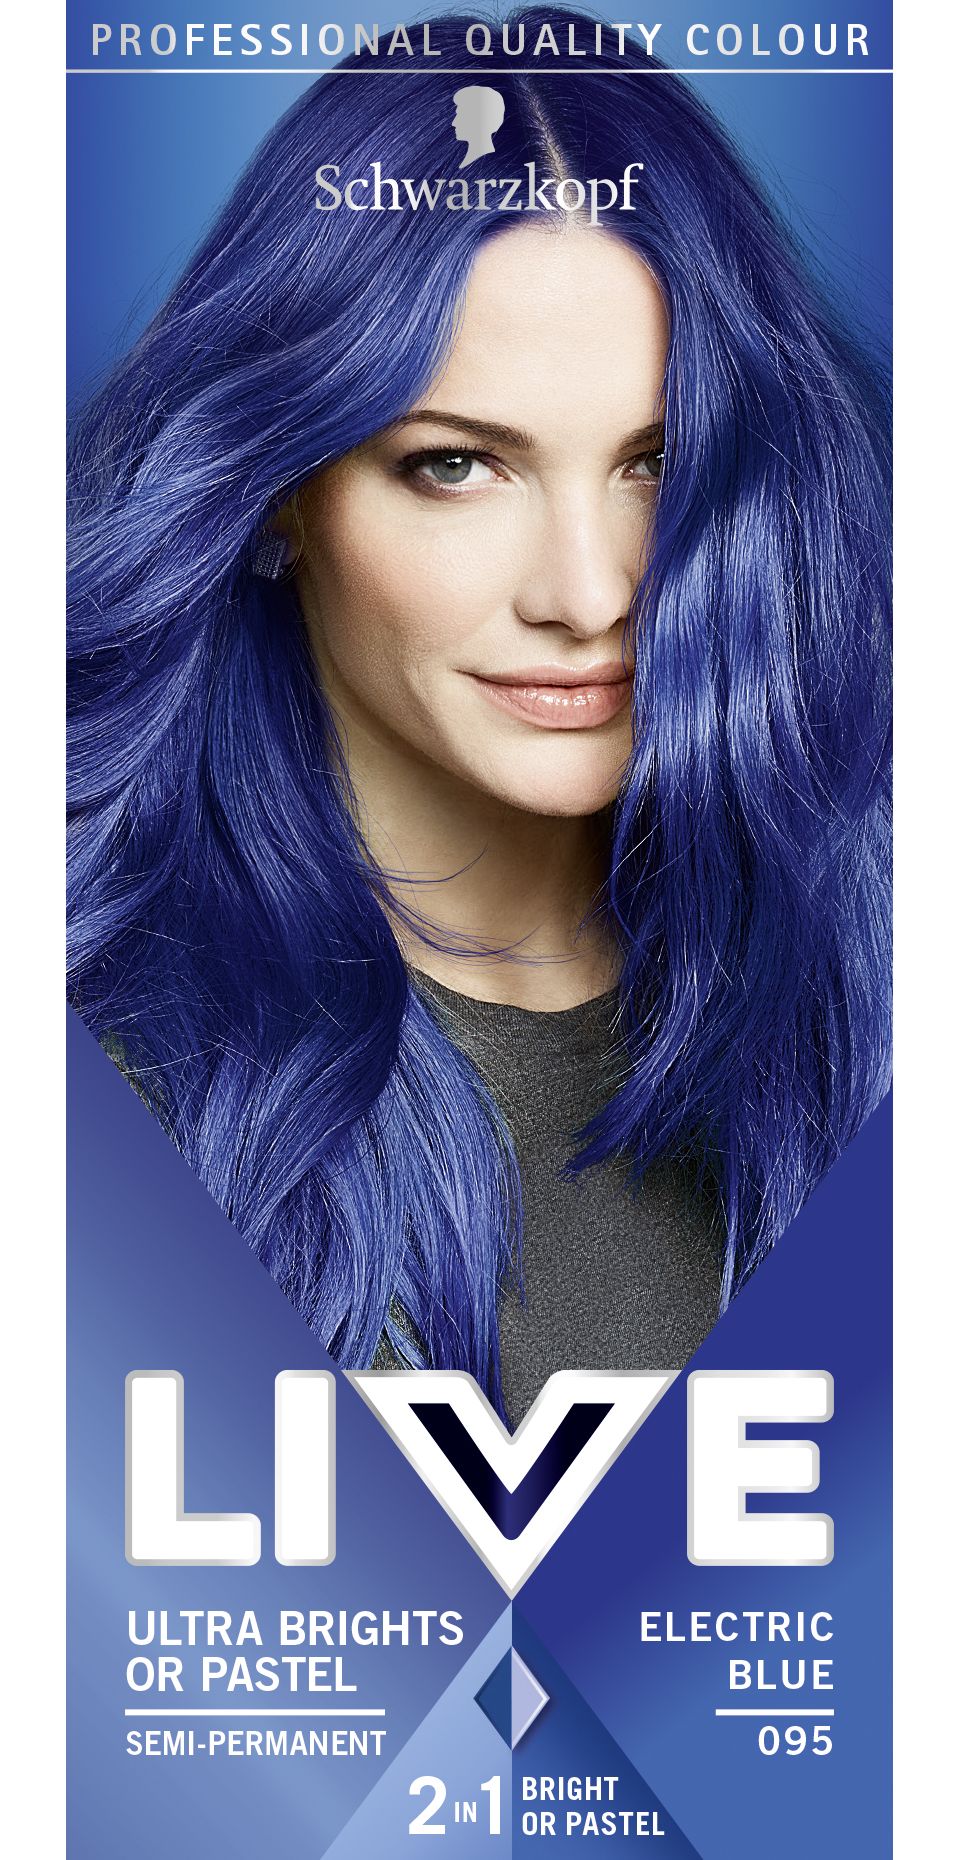 How To Dye Your Hair Blue At Home With Expert Tips